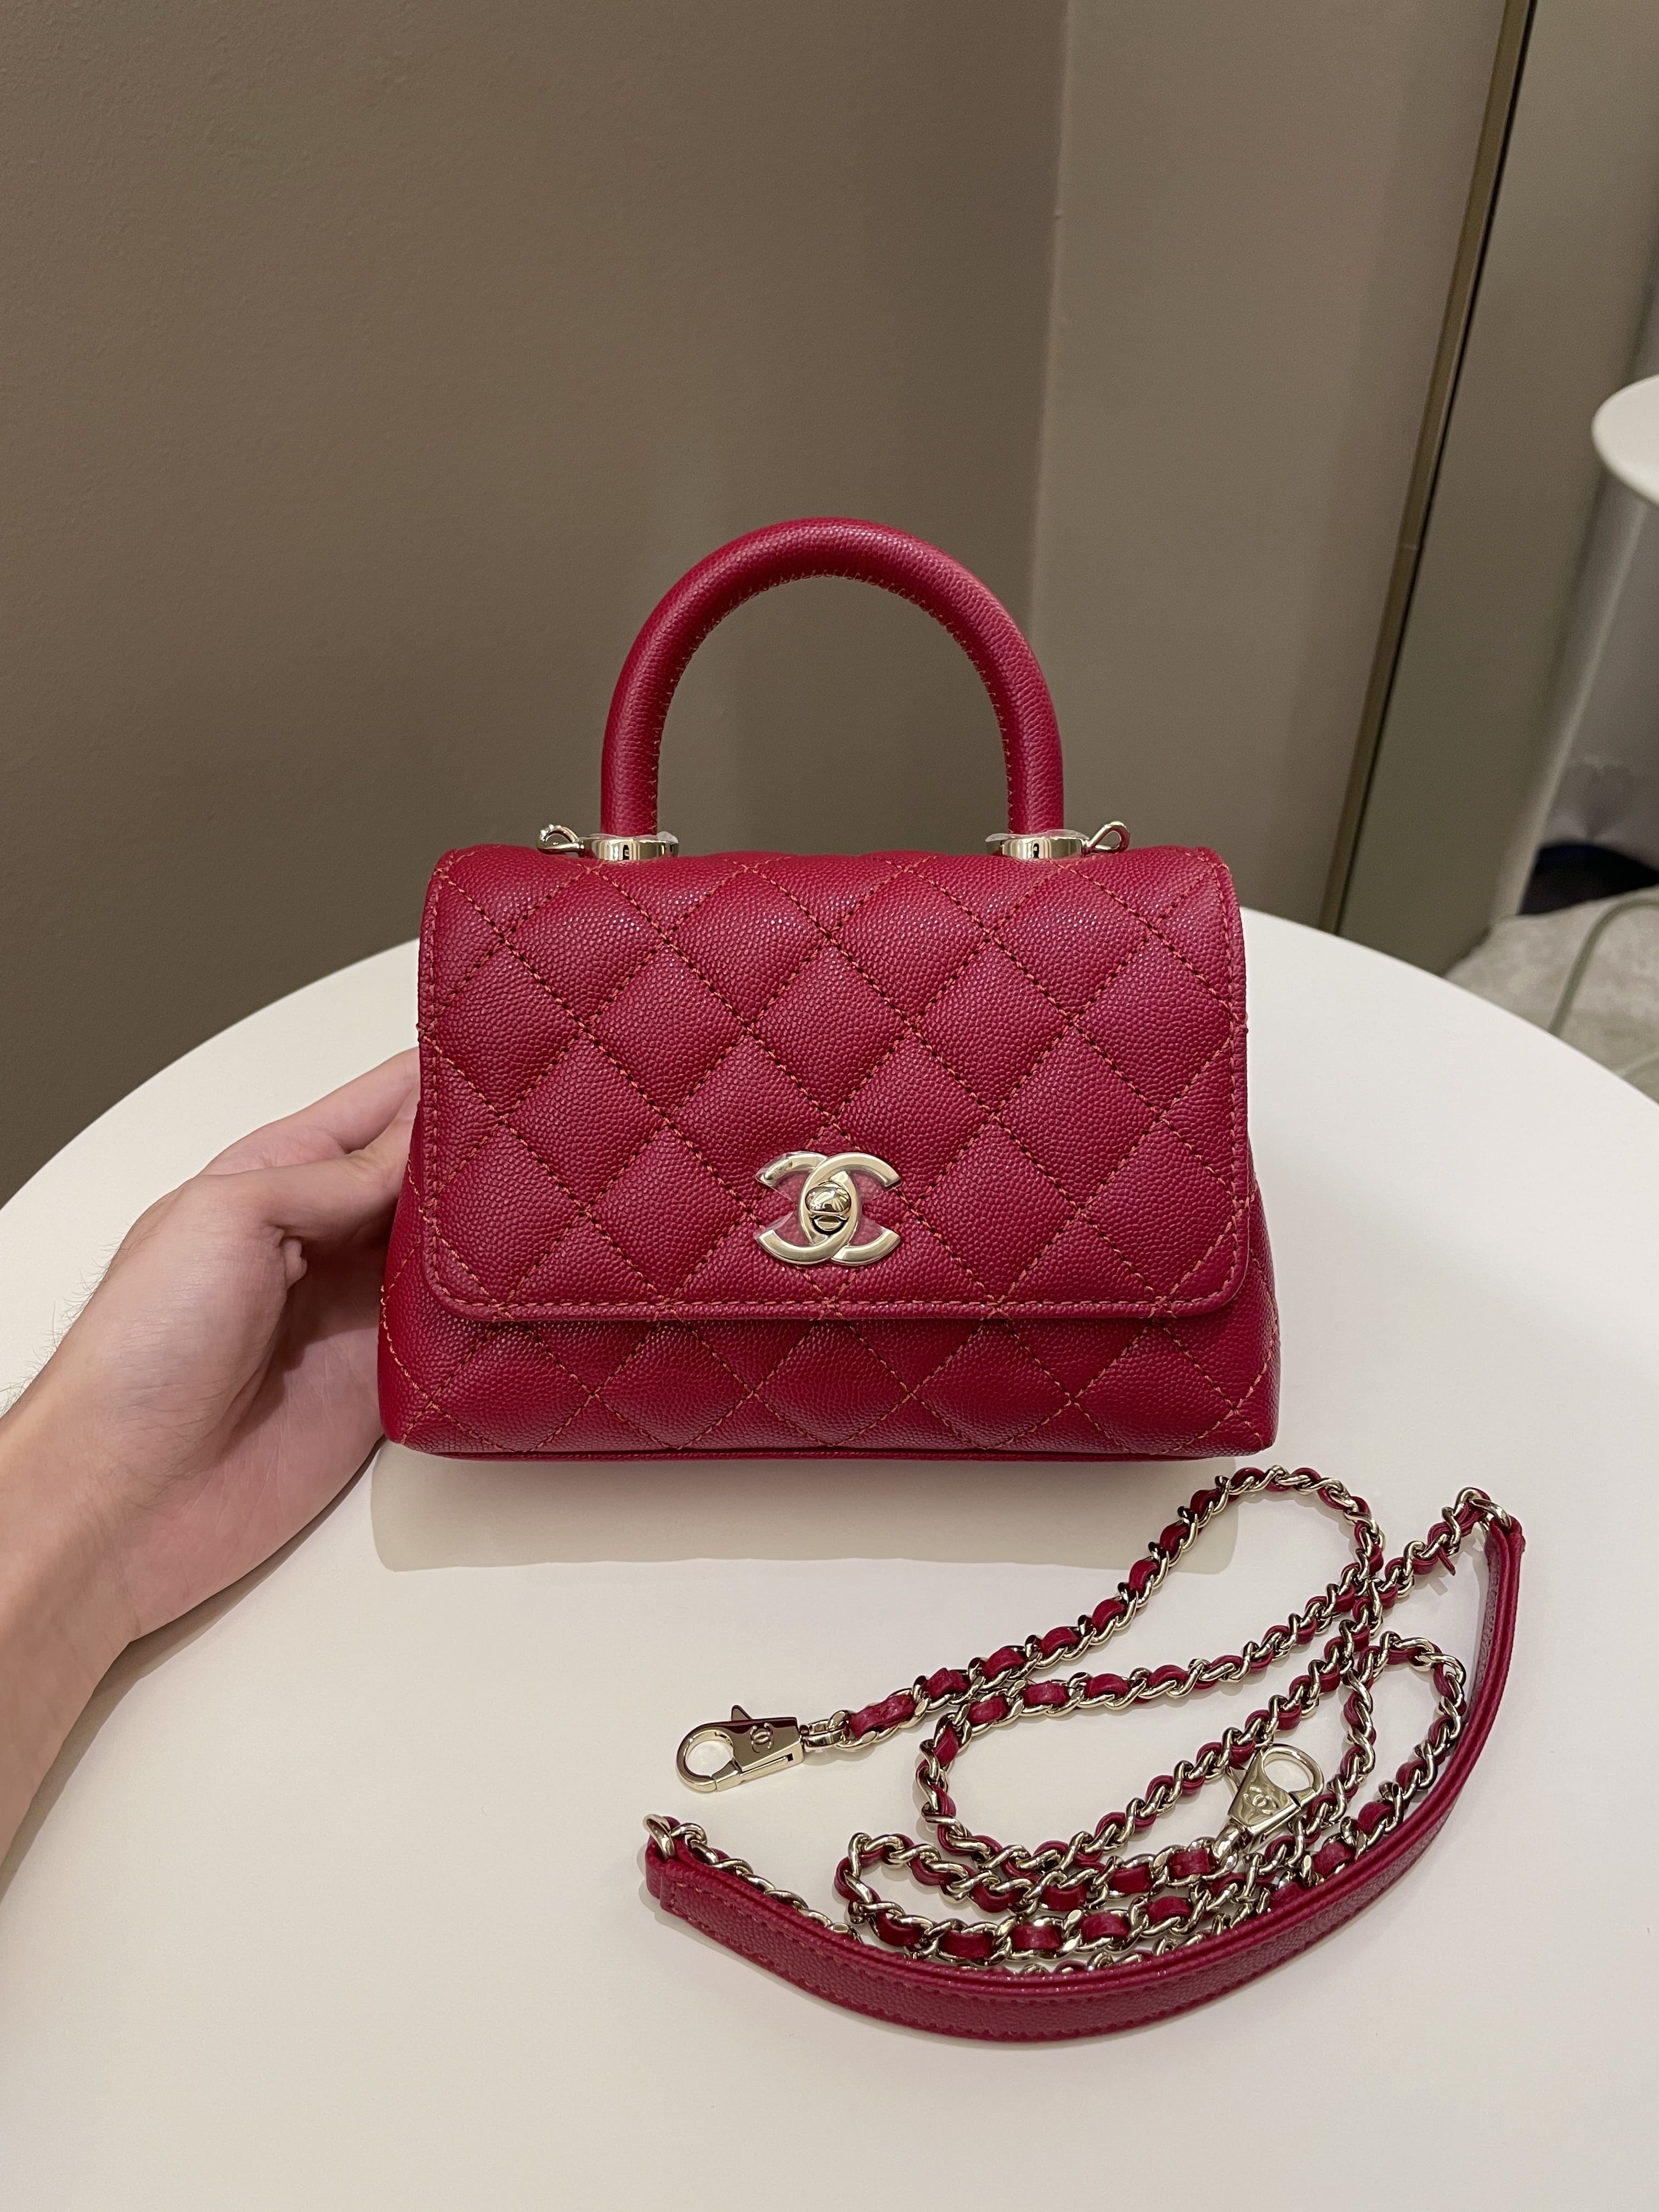 Chanel - Coco Handle - Red - Brand New